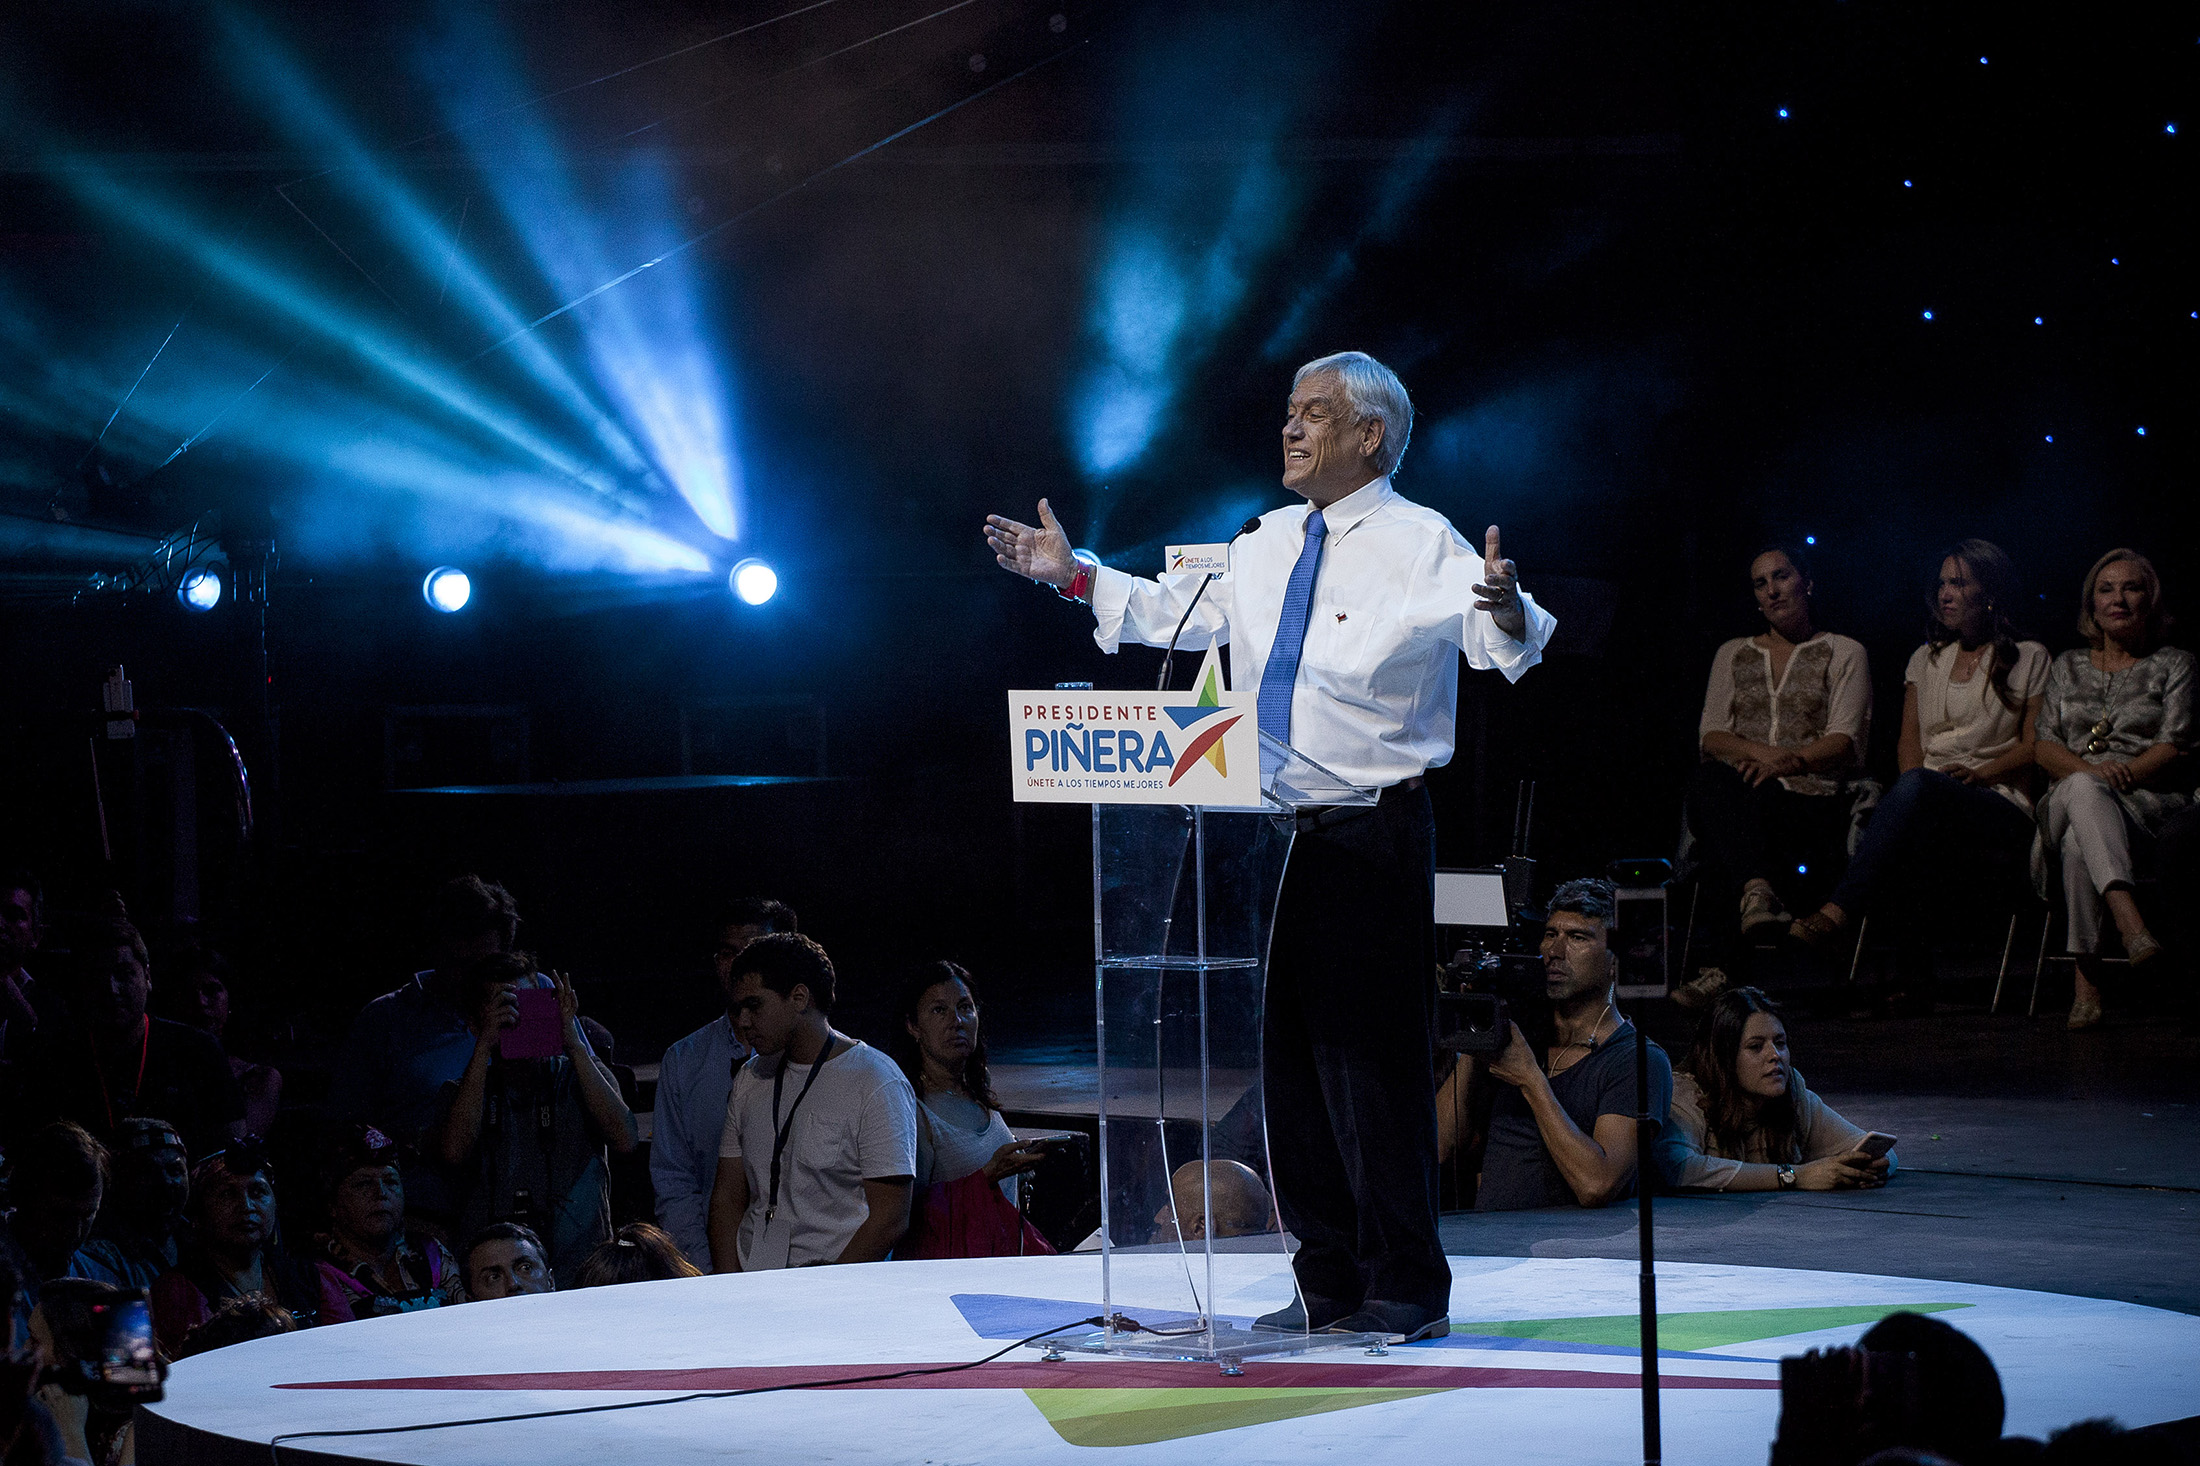 Chile's former president Sebastian Pinera, presidential candidate for the National Renewal party, speaks during a final campaign event in Santiago, Chile, on Thursday, Dec. 14, 2017.&nbsp;